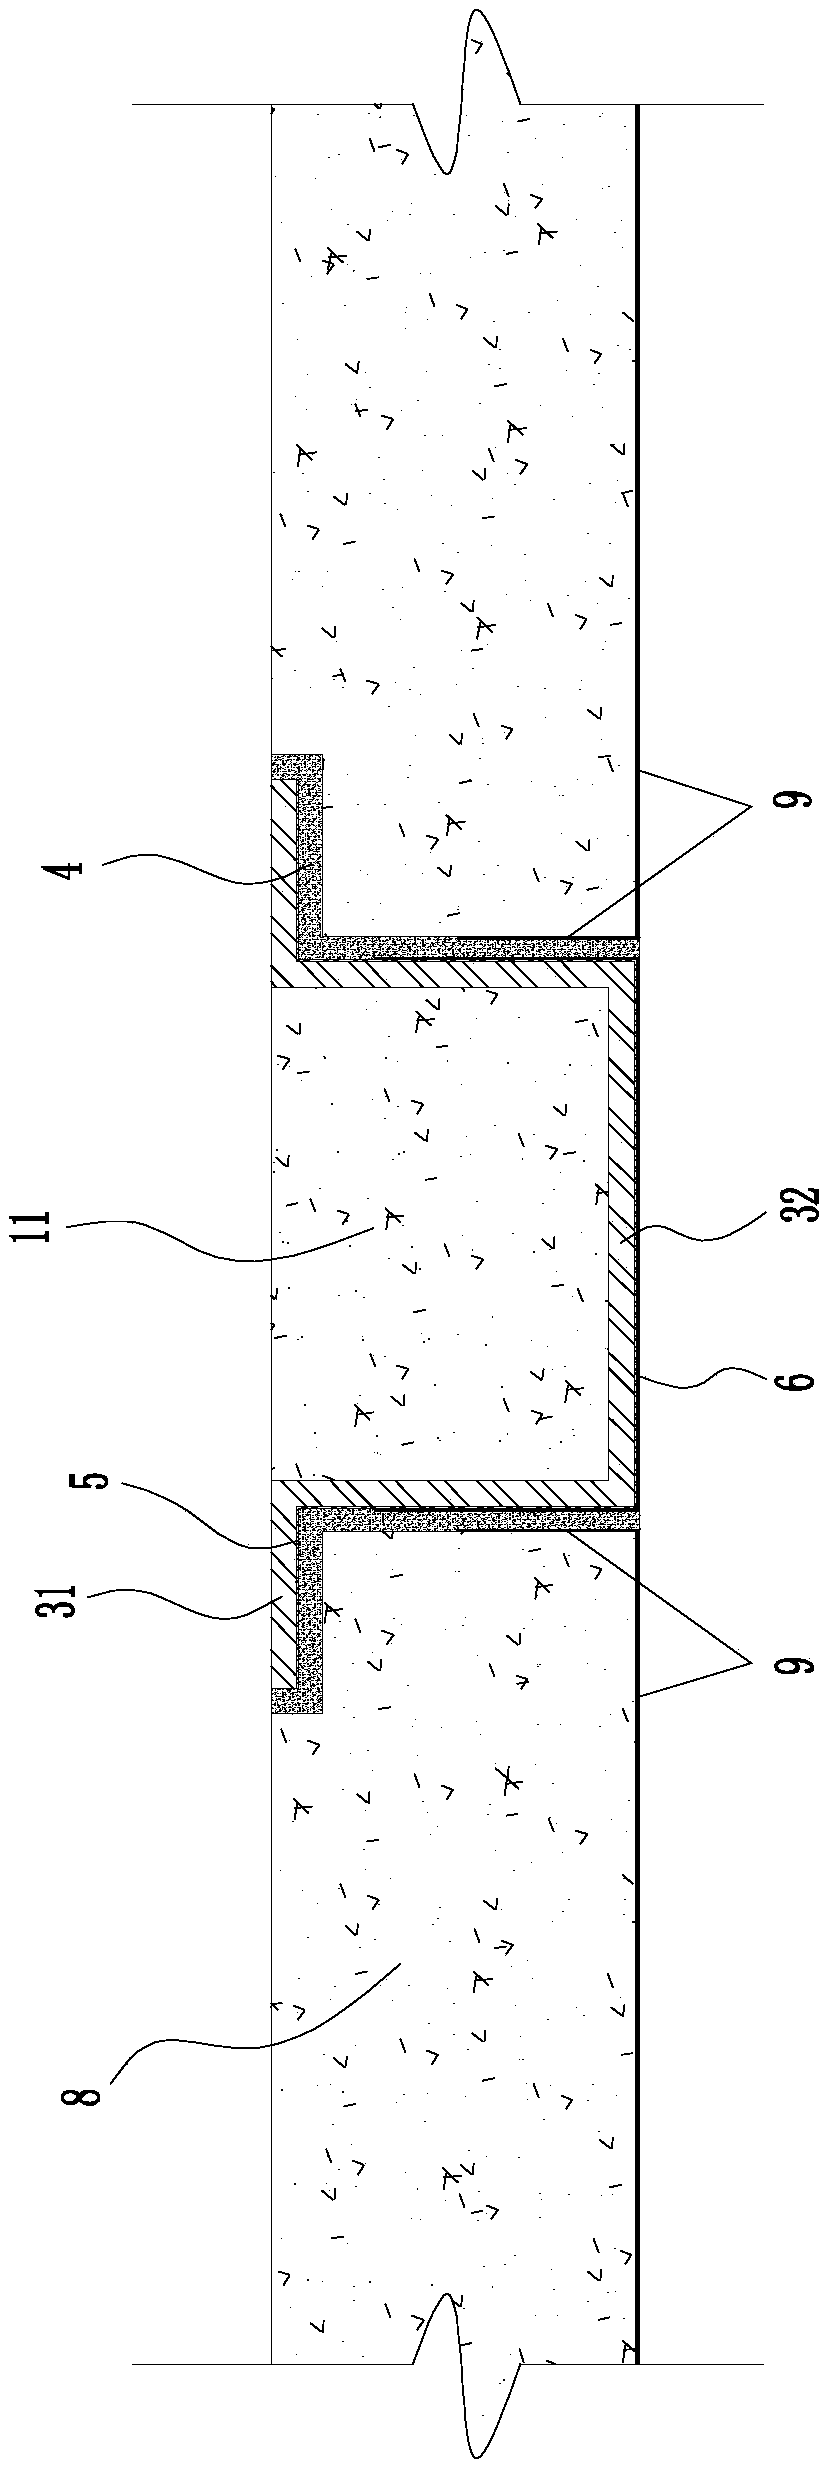 A stainless steel box and repair method for repairing holes left in hoisting reinforced concrete roofs of prilling towers and silos